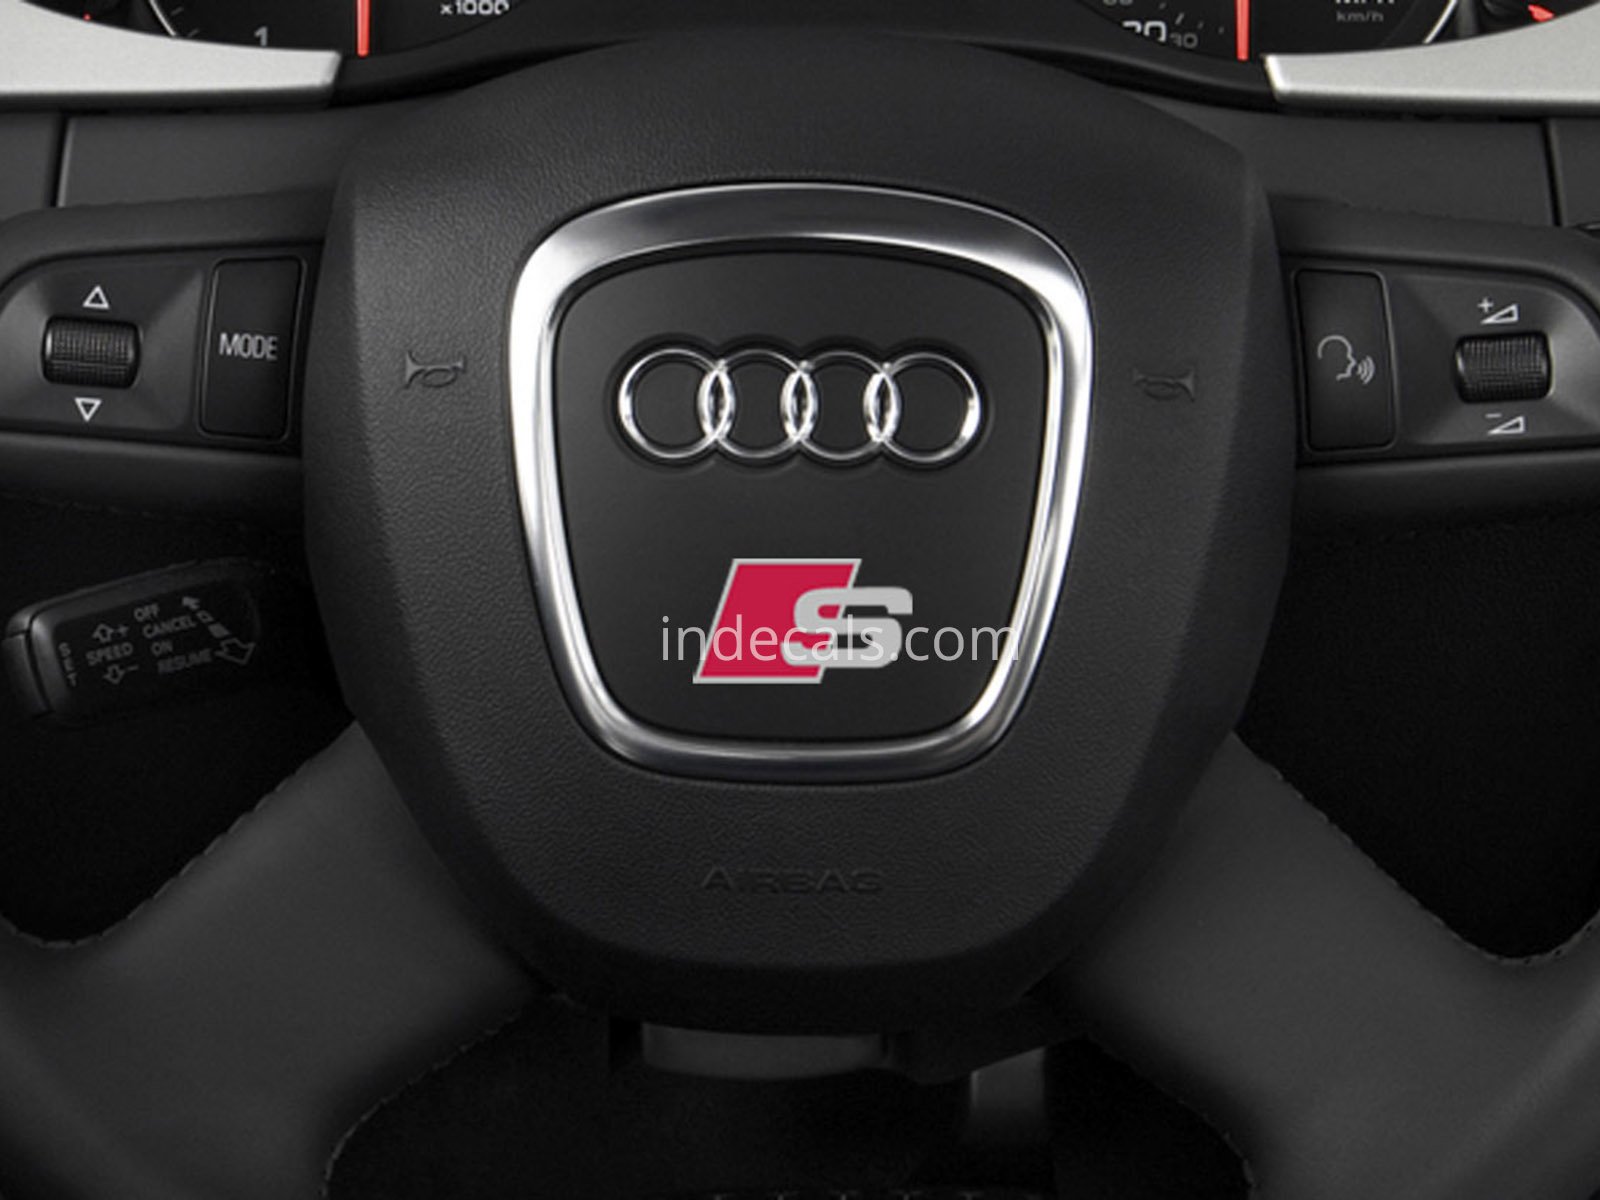 2 x Audi S-Line Stickers for Steering Wheel - Silver + Red